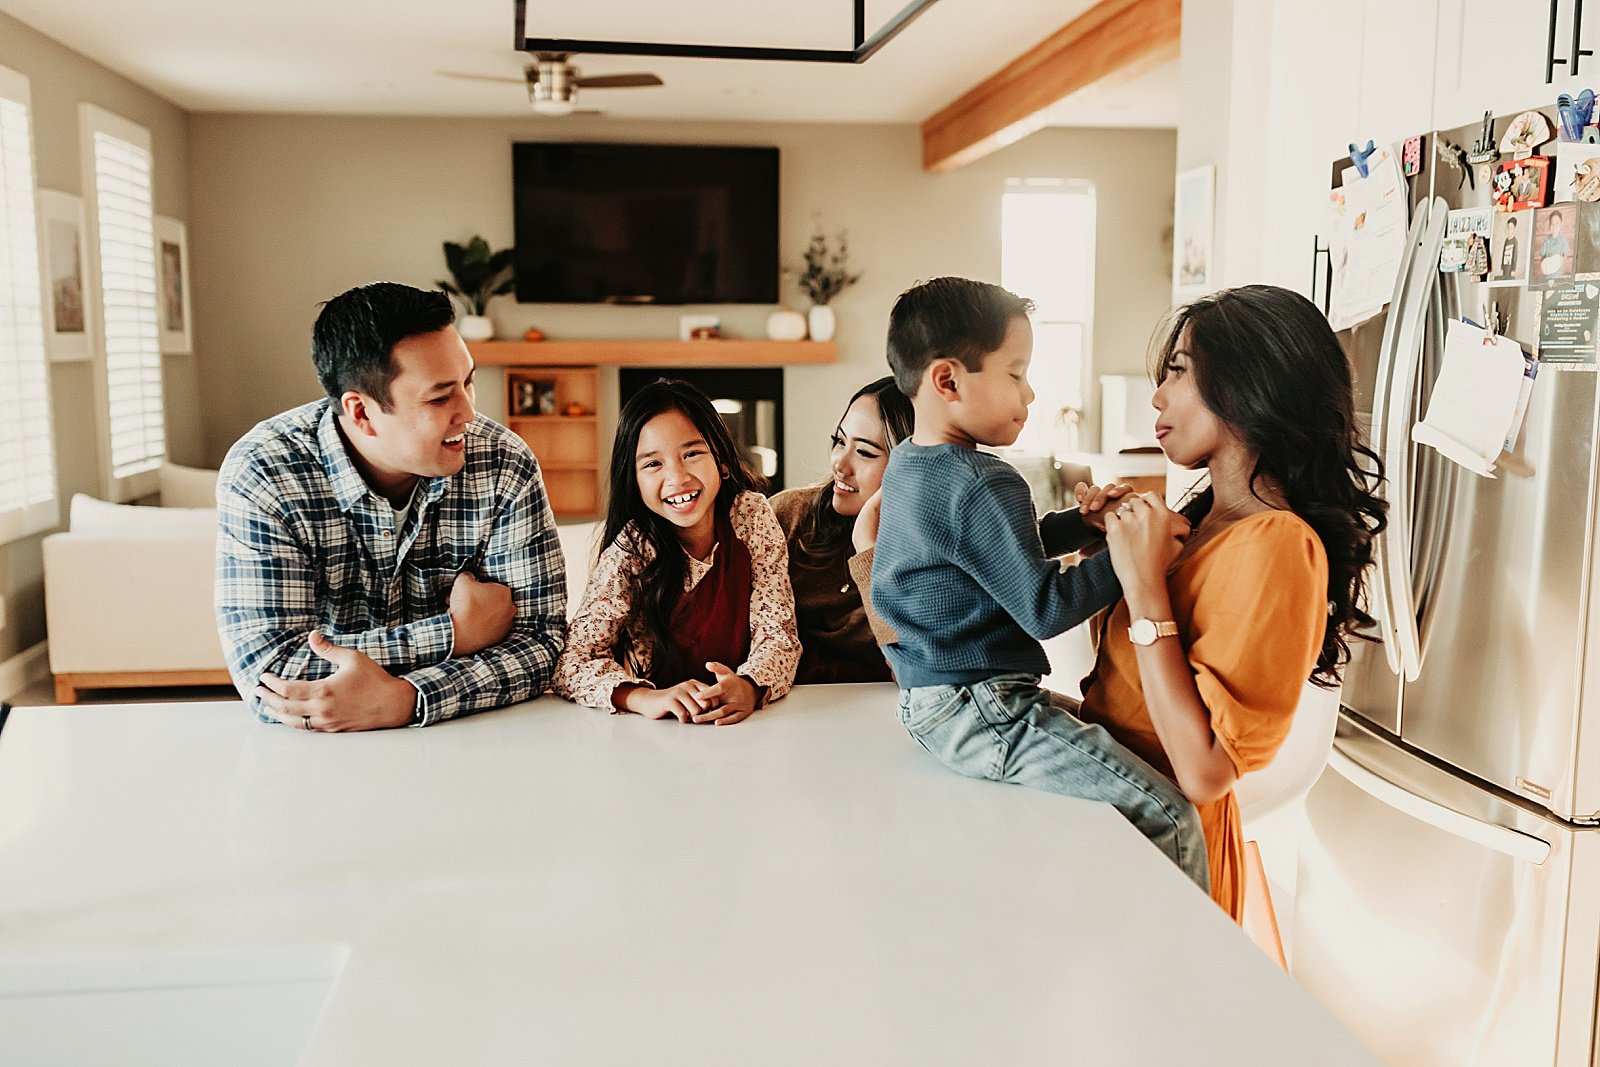  Family gathered in the kitchen for a lifestyle photo shoot in California 